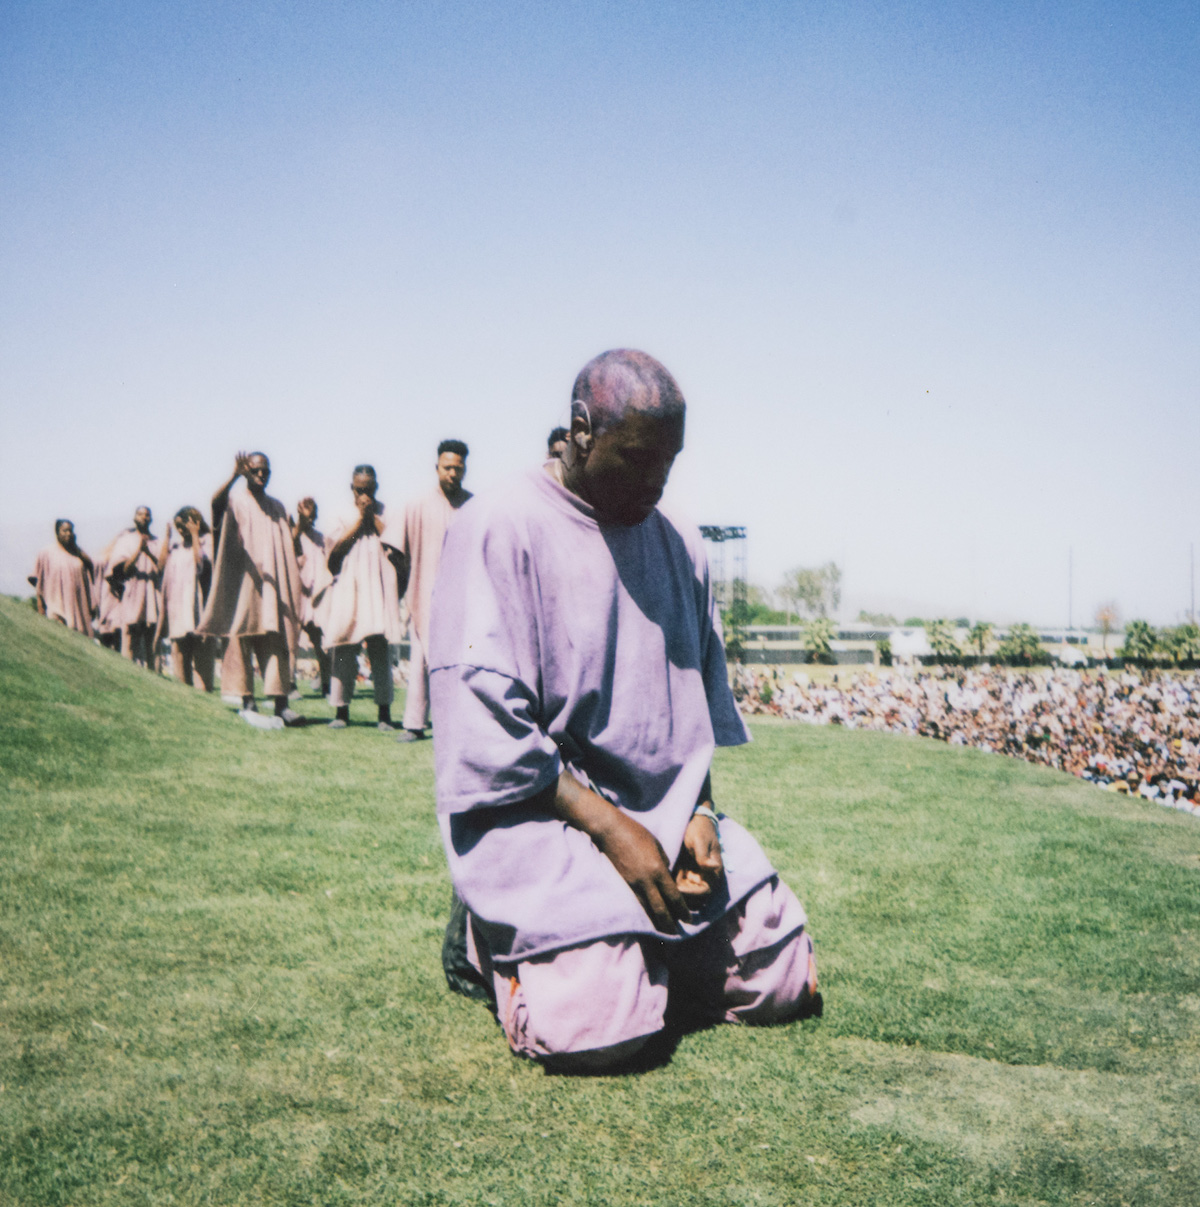 Grass from Kanye's Sunday Service at Coachella is for sale on eBay | Cactus Hugs1200 x 1207